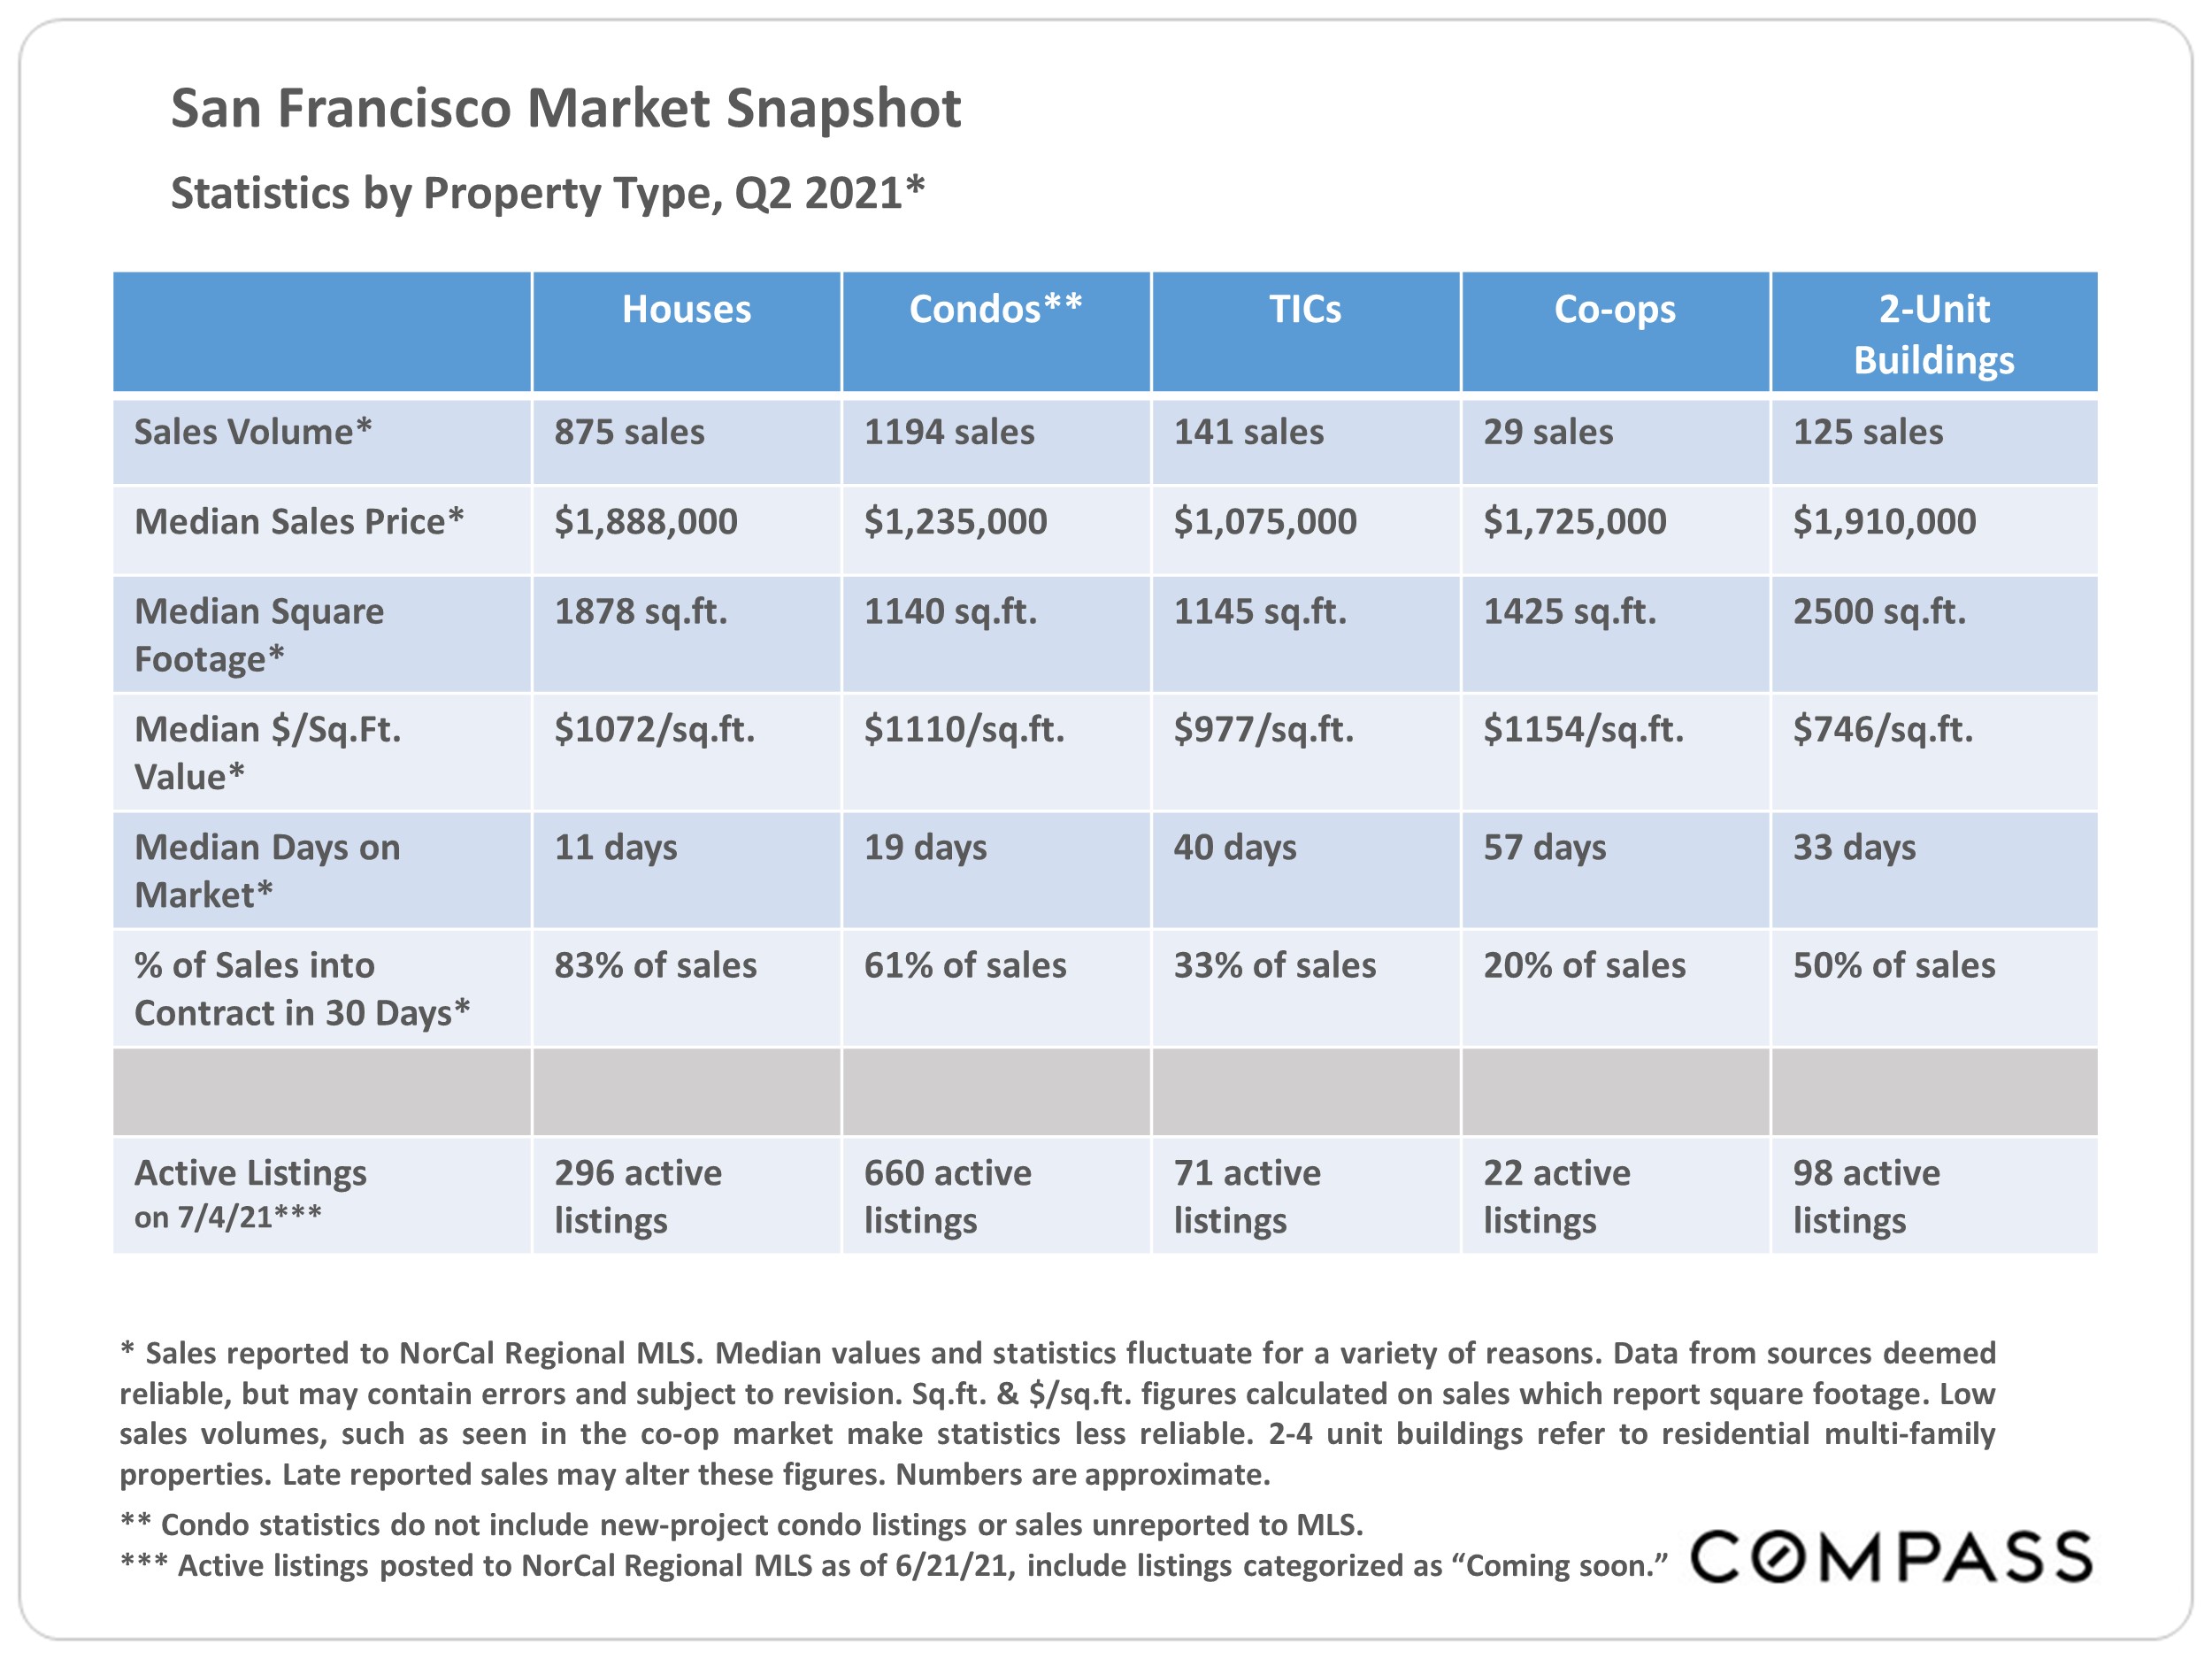 A table of statistics by property type for Q2 2021; San Francisco Market Snapshot